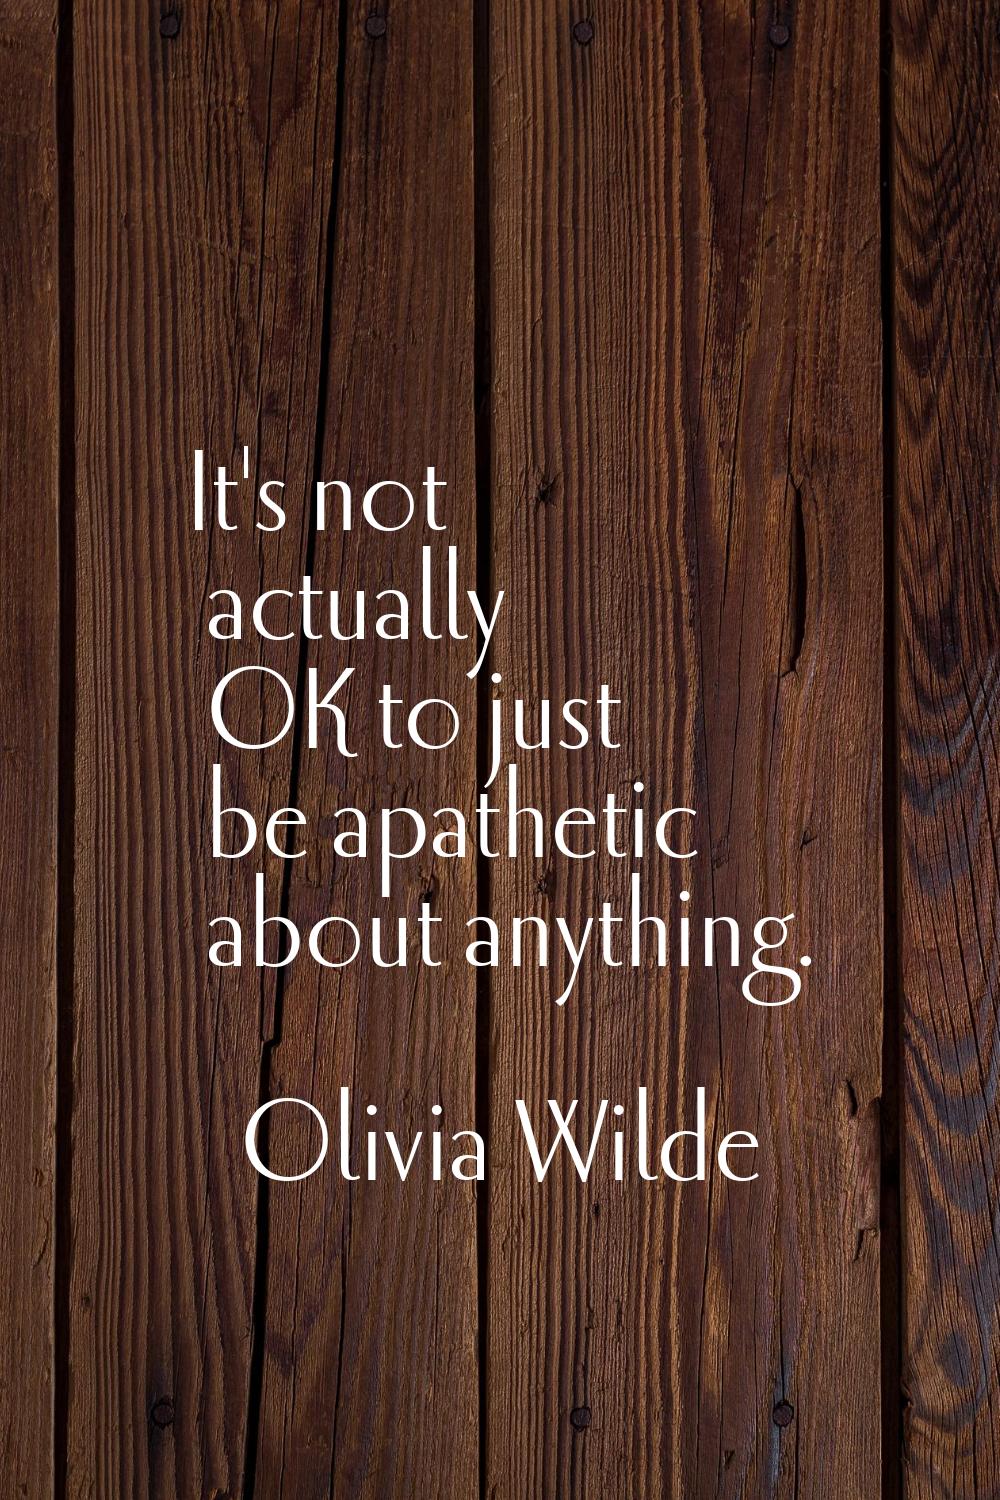 It's not actually OK to just be apathetic about anything.